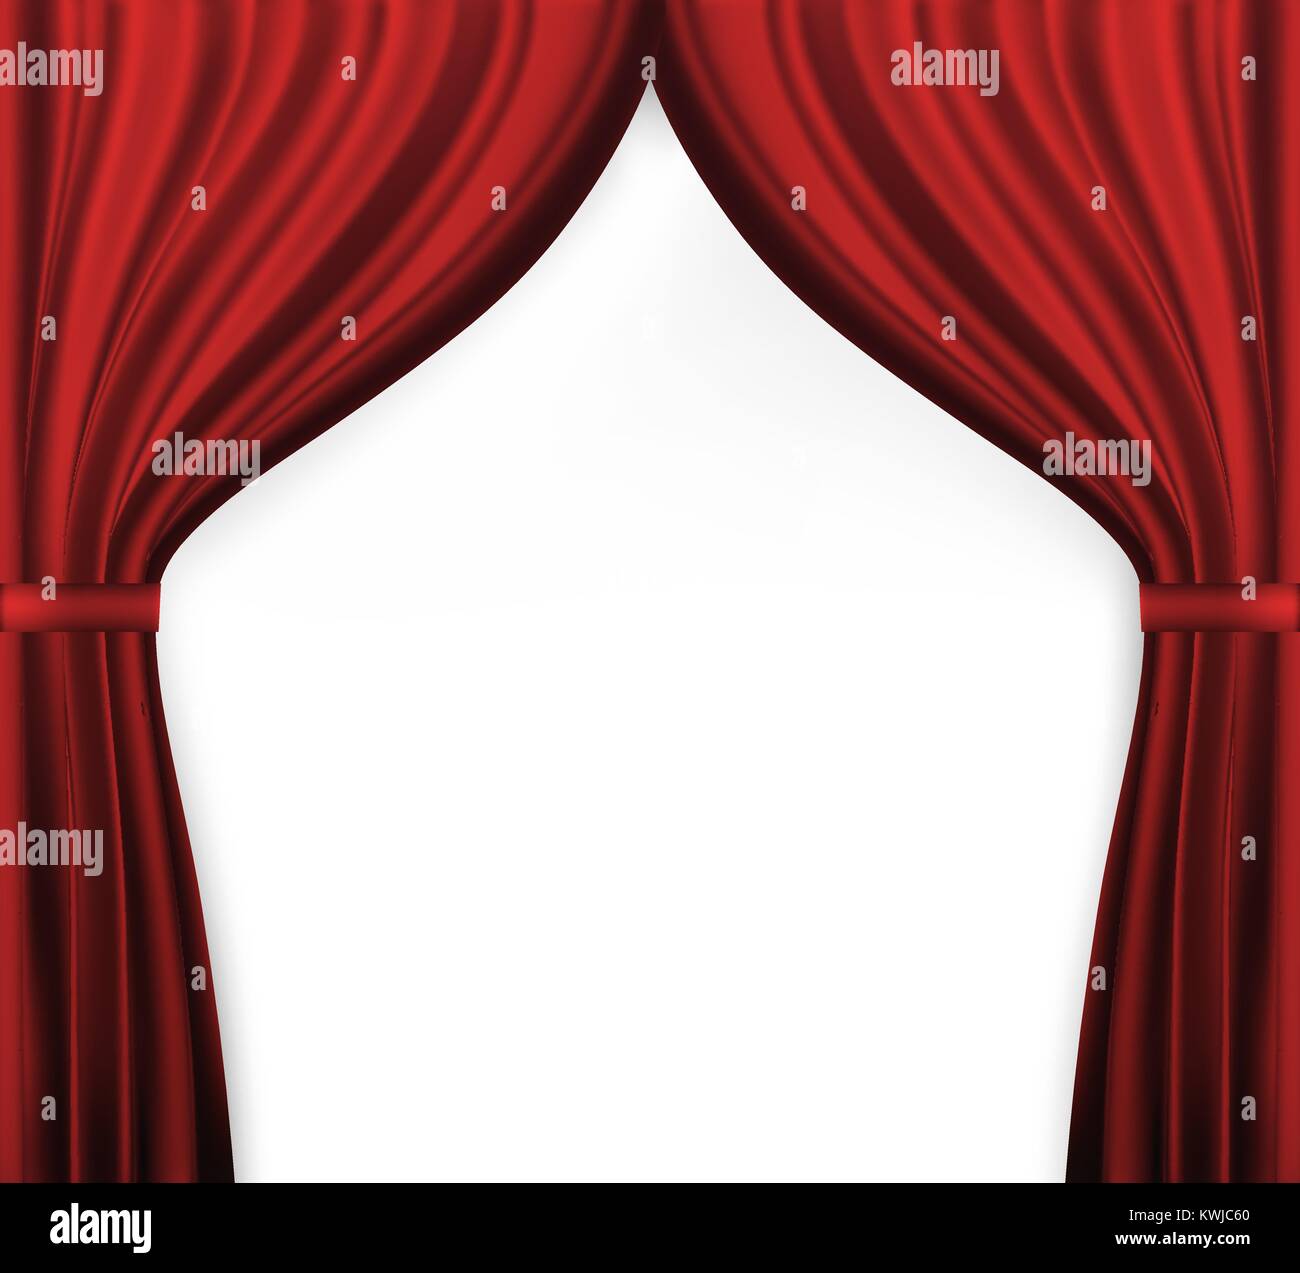 Naturalistic image of Curtain, open curtains red color. Vector Illustration. Stock Vector